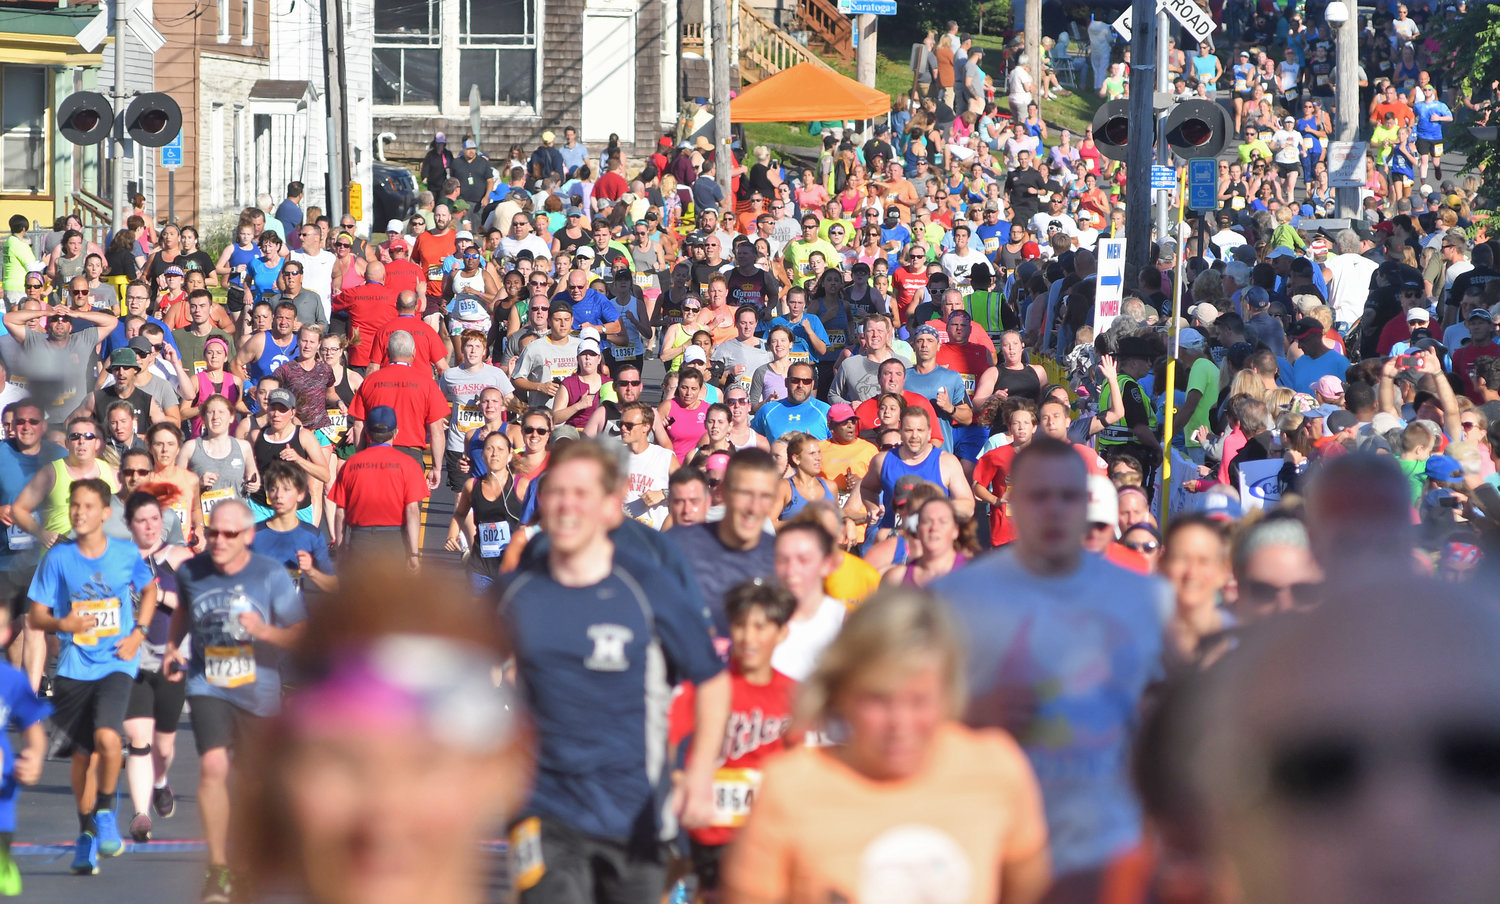 Runners near the finish line for a recent Boilermaker Road Race in downtown Utica.